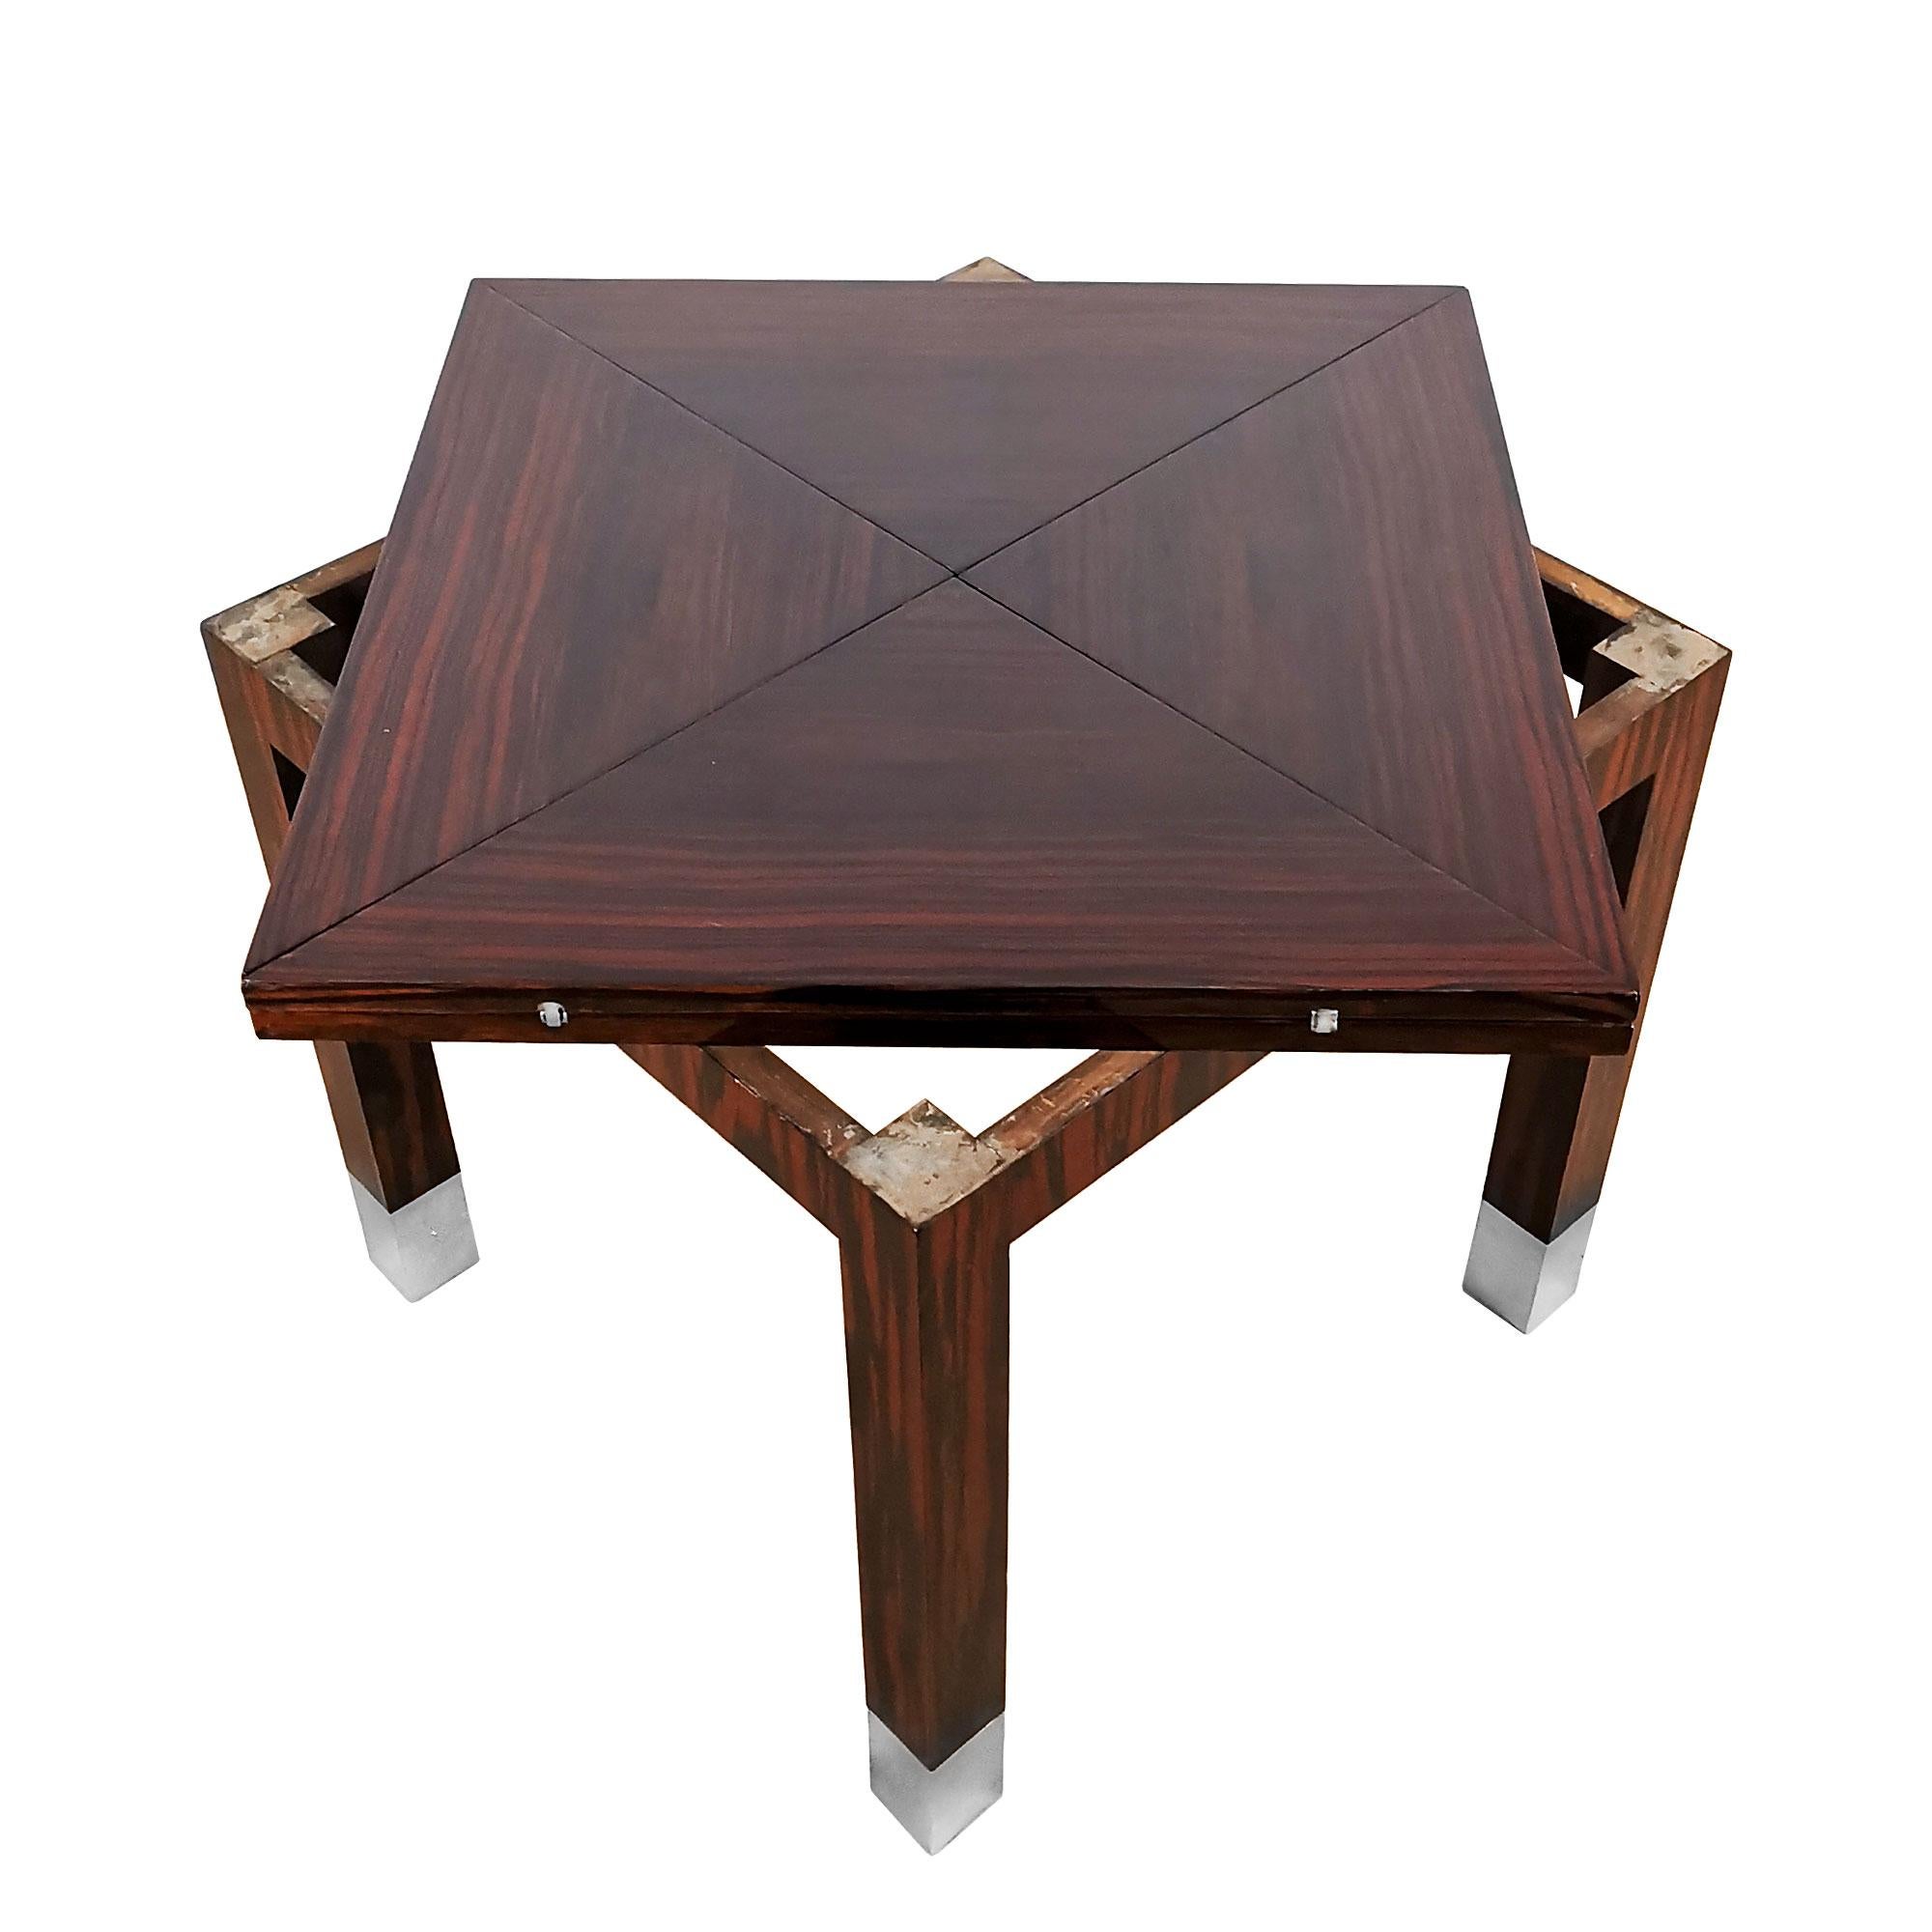 1930s Art Deco Folding Game Table in Oak, Macassar Ebony and Brass - France In Good Condition For Sale In Girona, ES